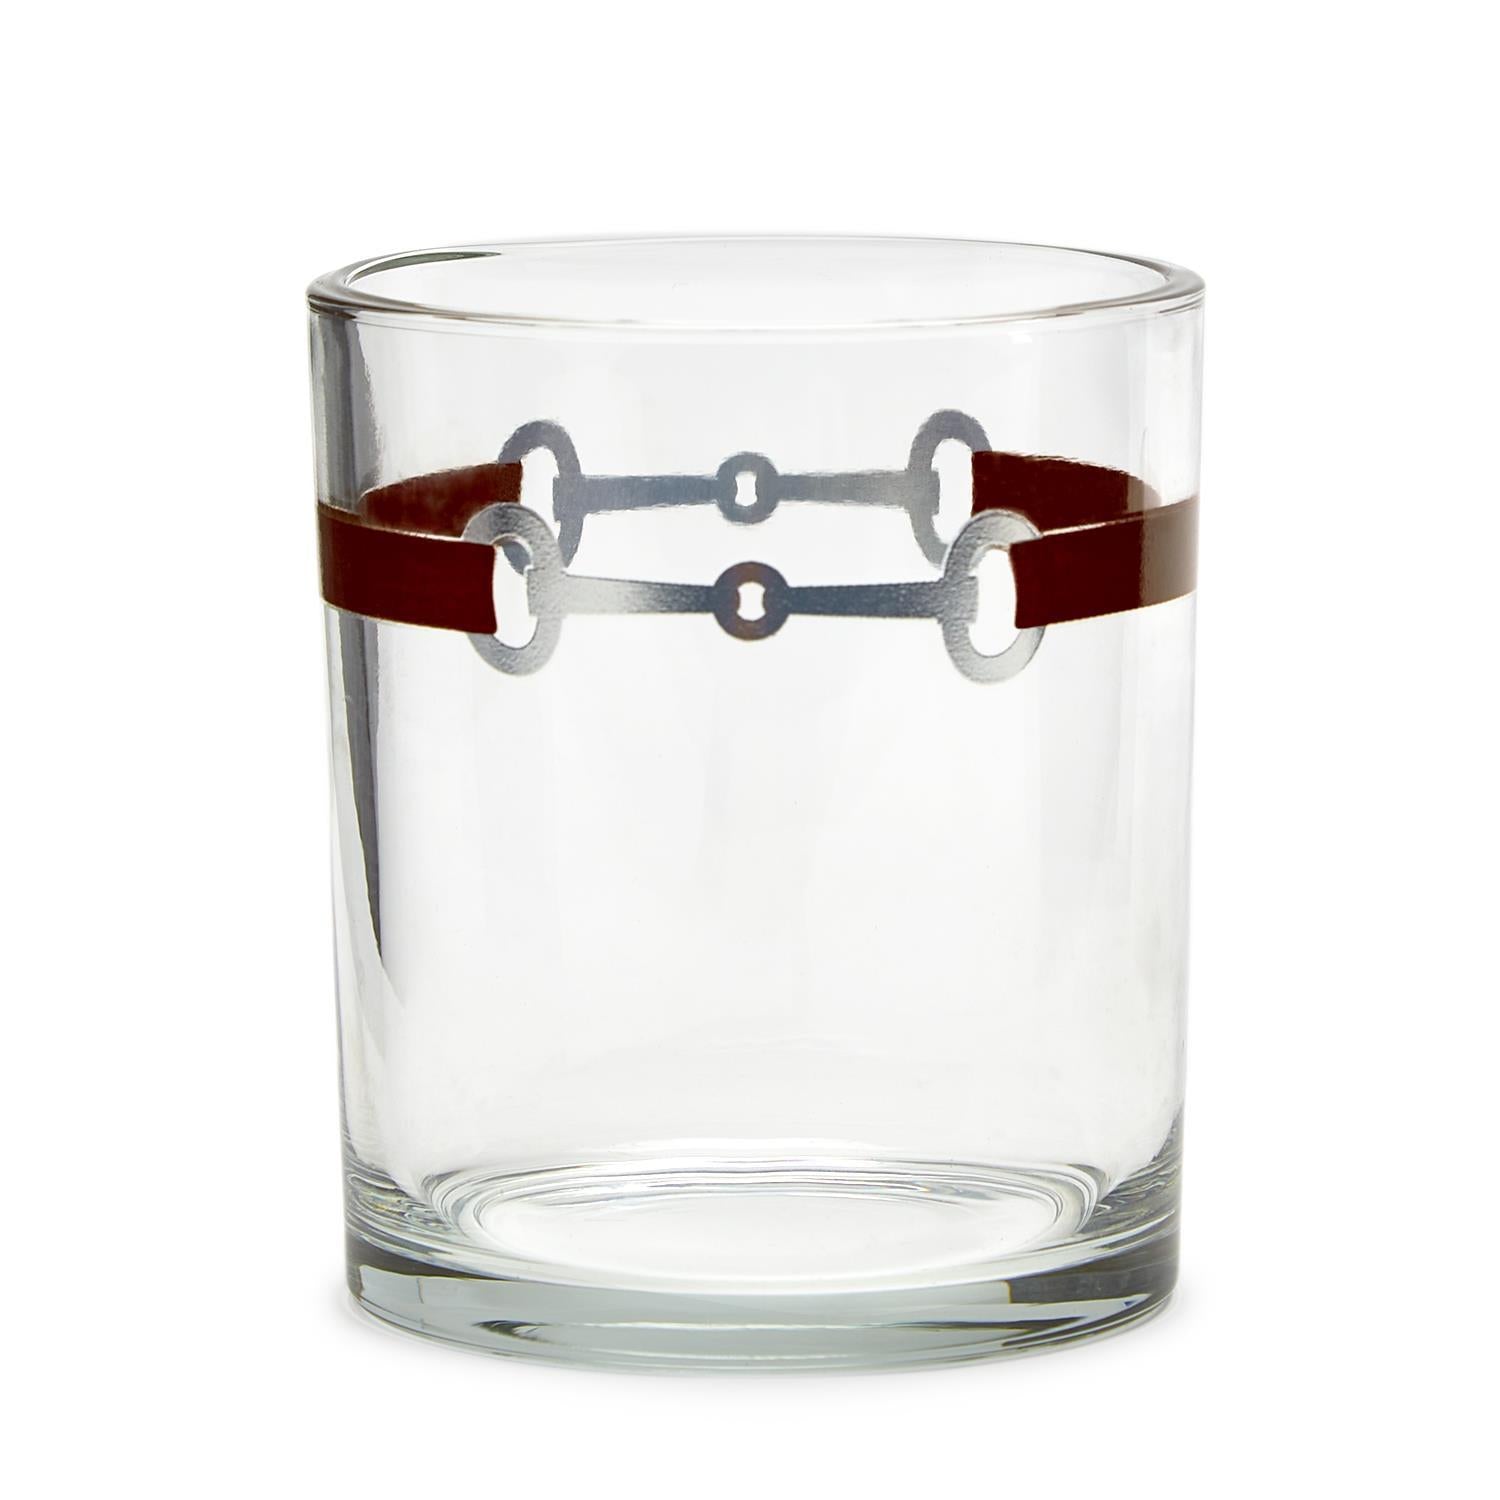 Two's Co Just a Bit Double Old Fashion Glasses in Gift Box Set of 4